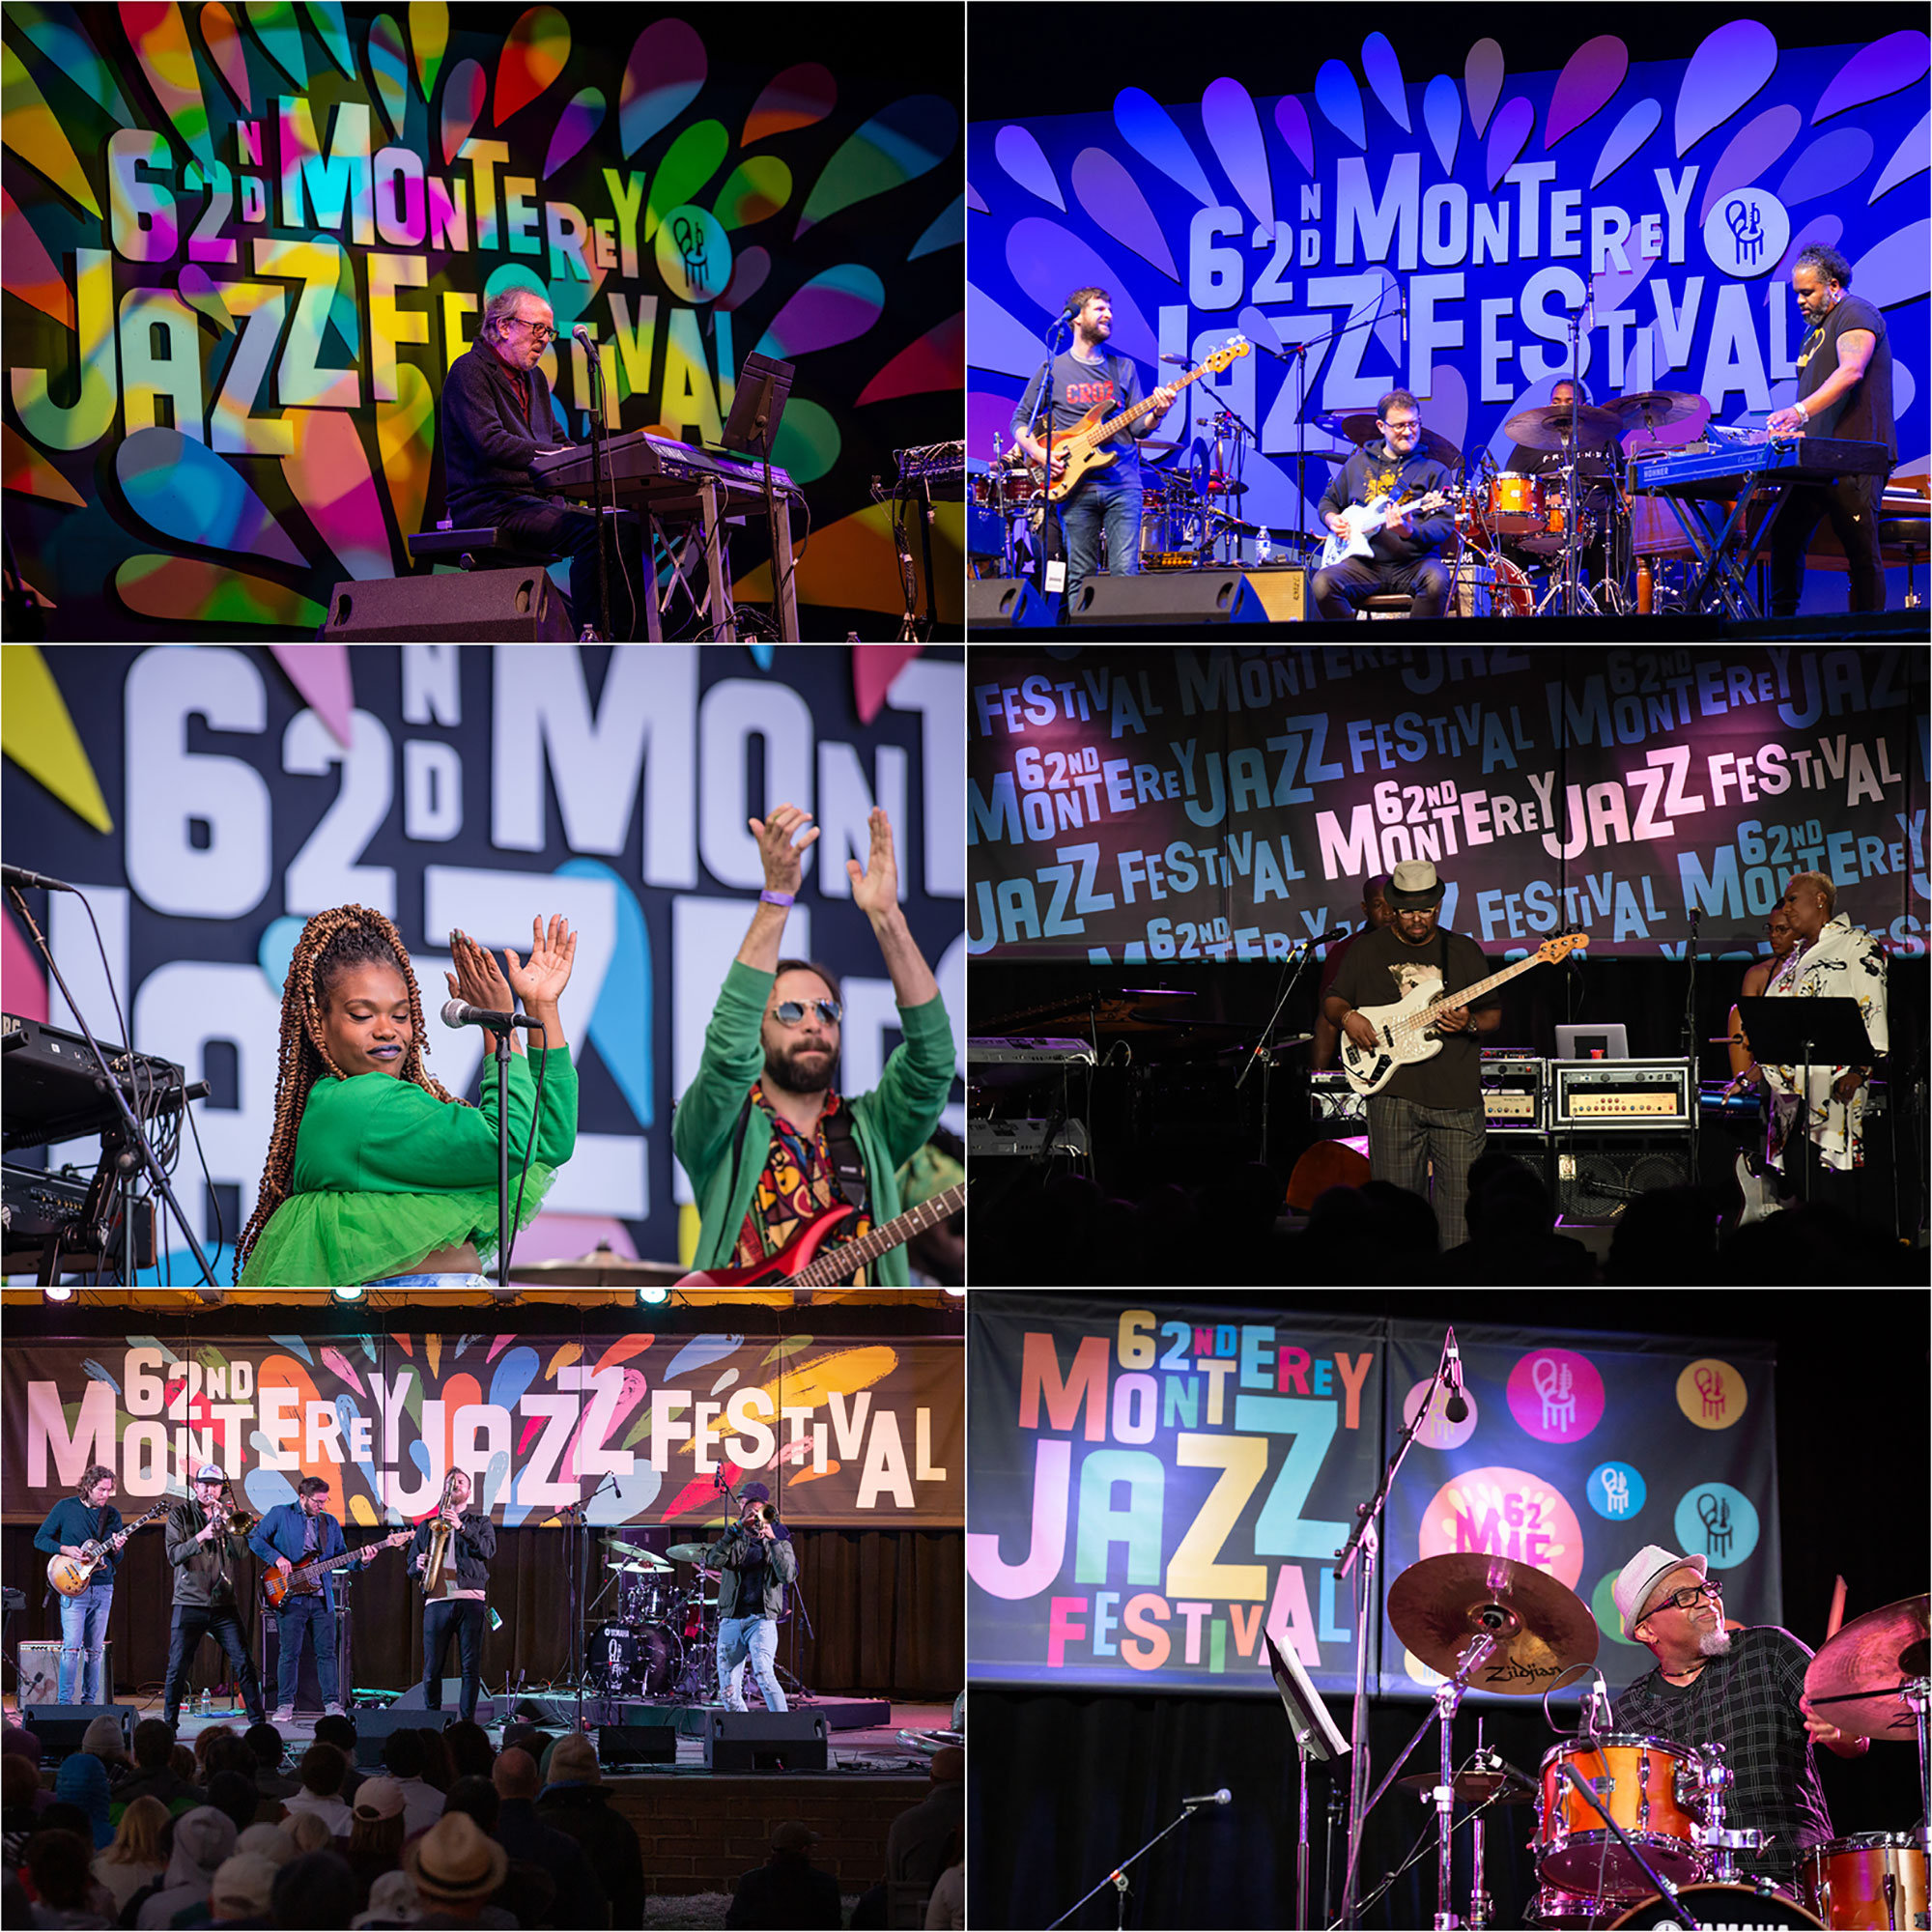 A series of photos showing people performing at the mobile jazz festival.